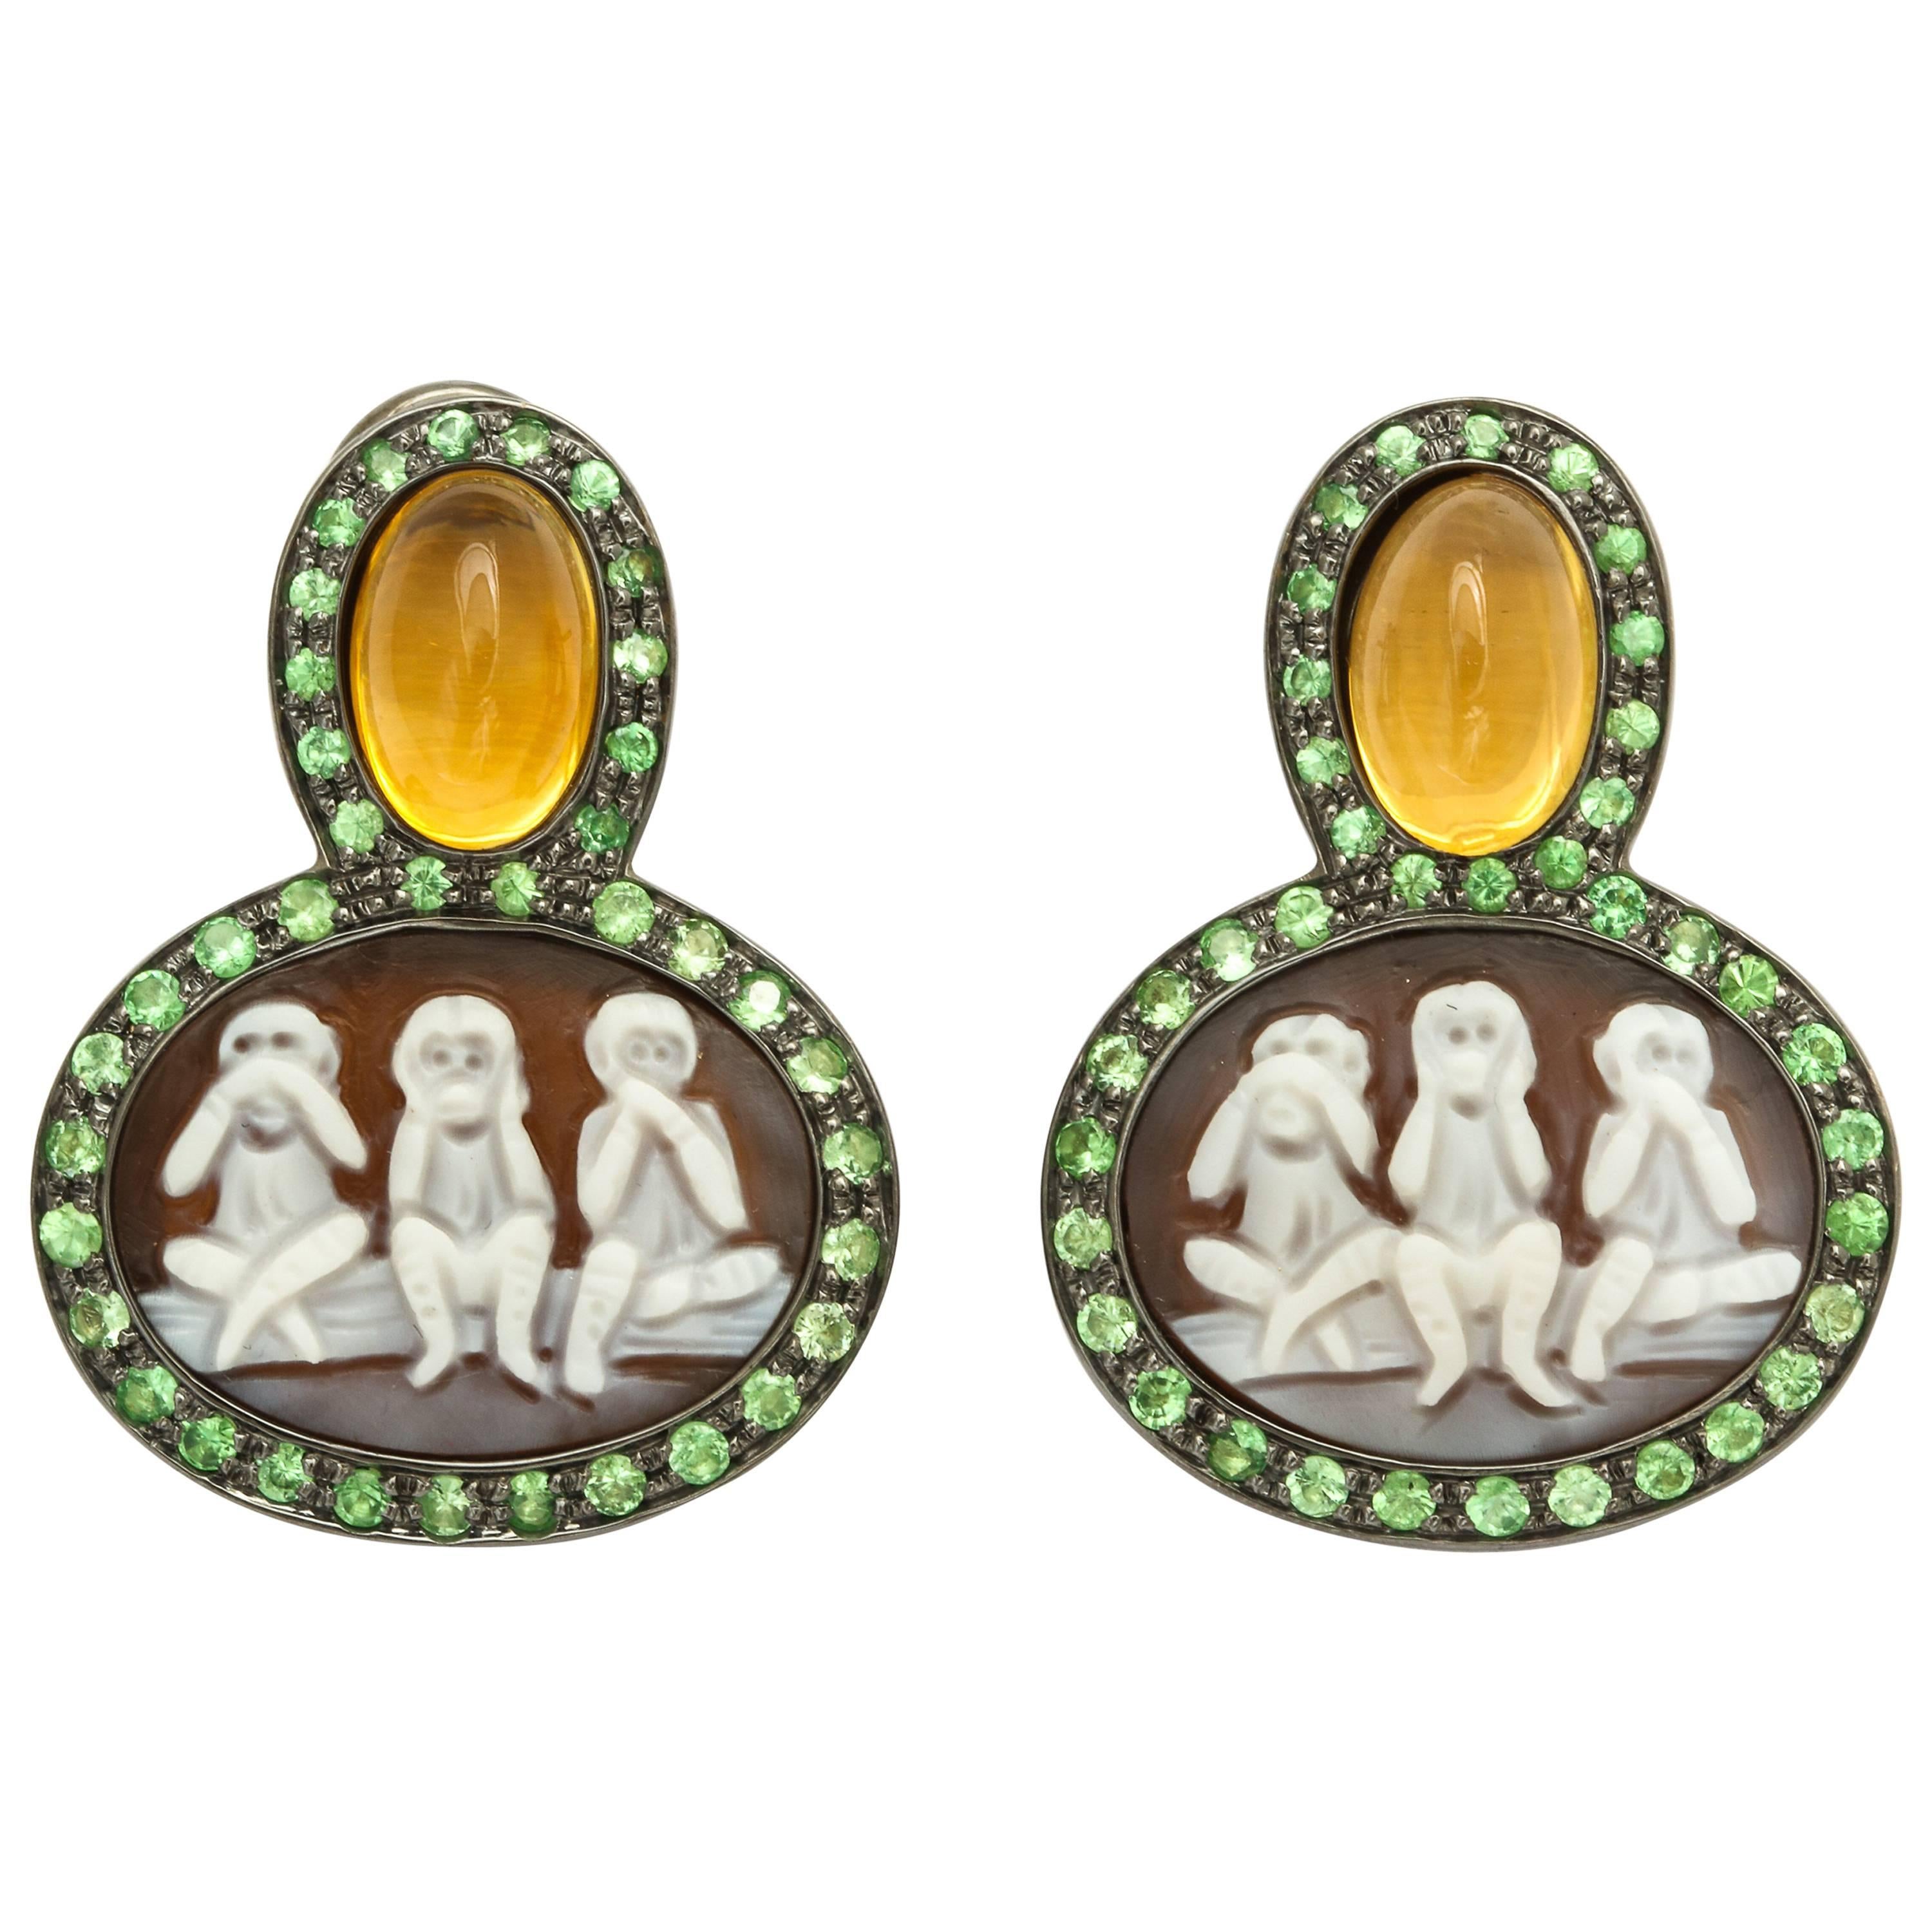 Amedeo Sardonyx Shell Cameo Couture Scimmiette Earrings For Sale